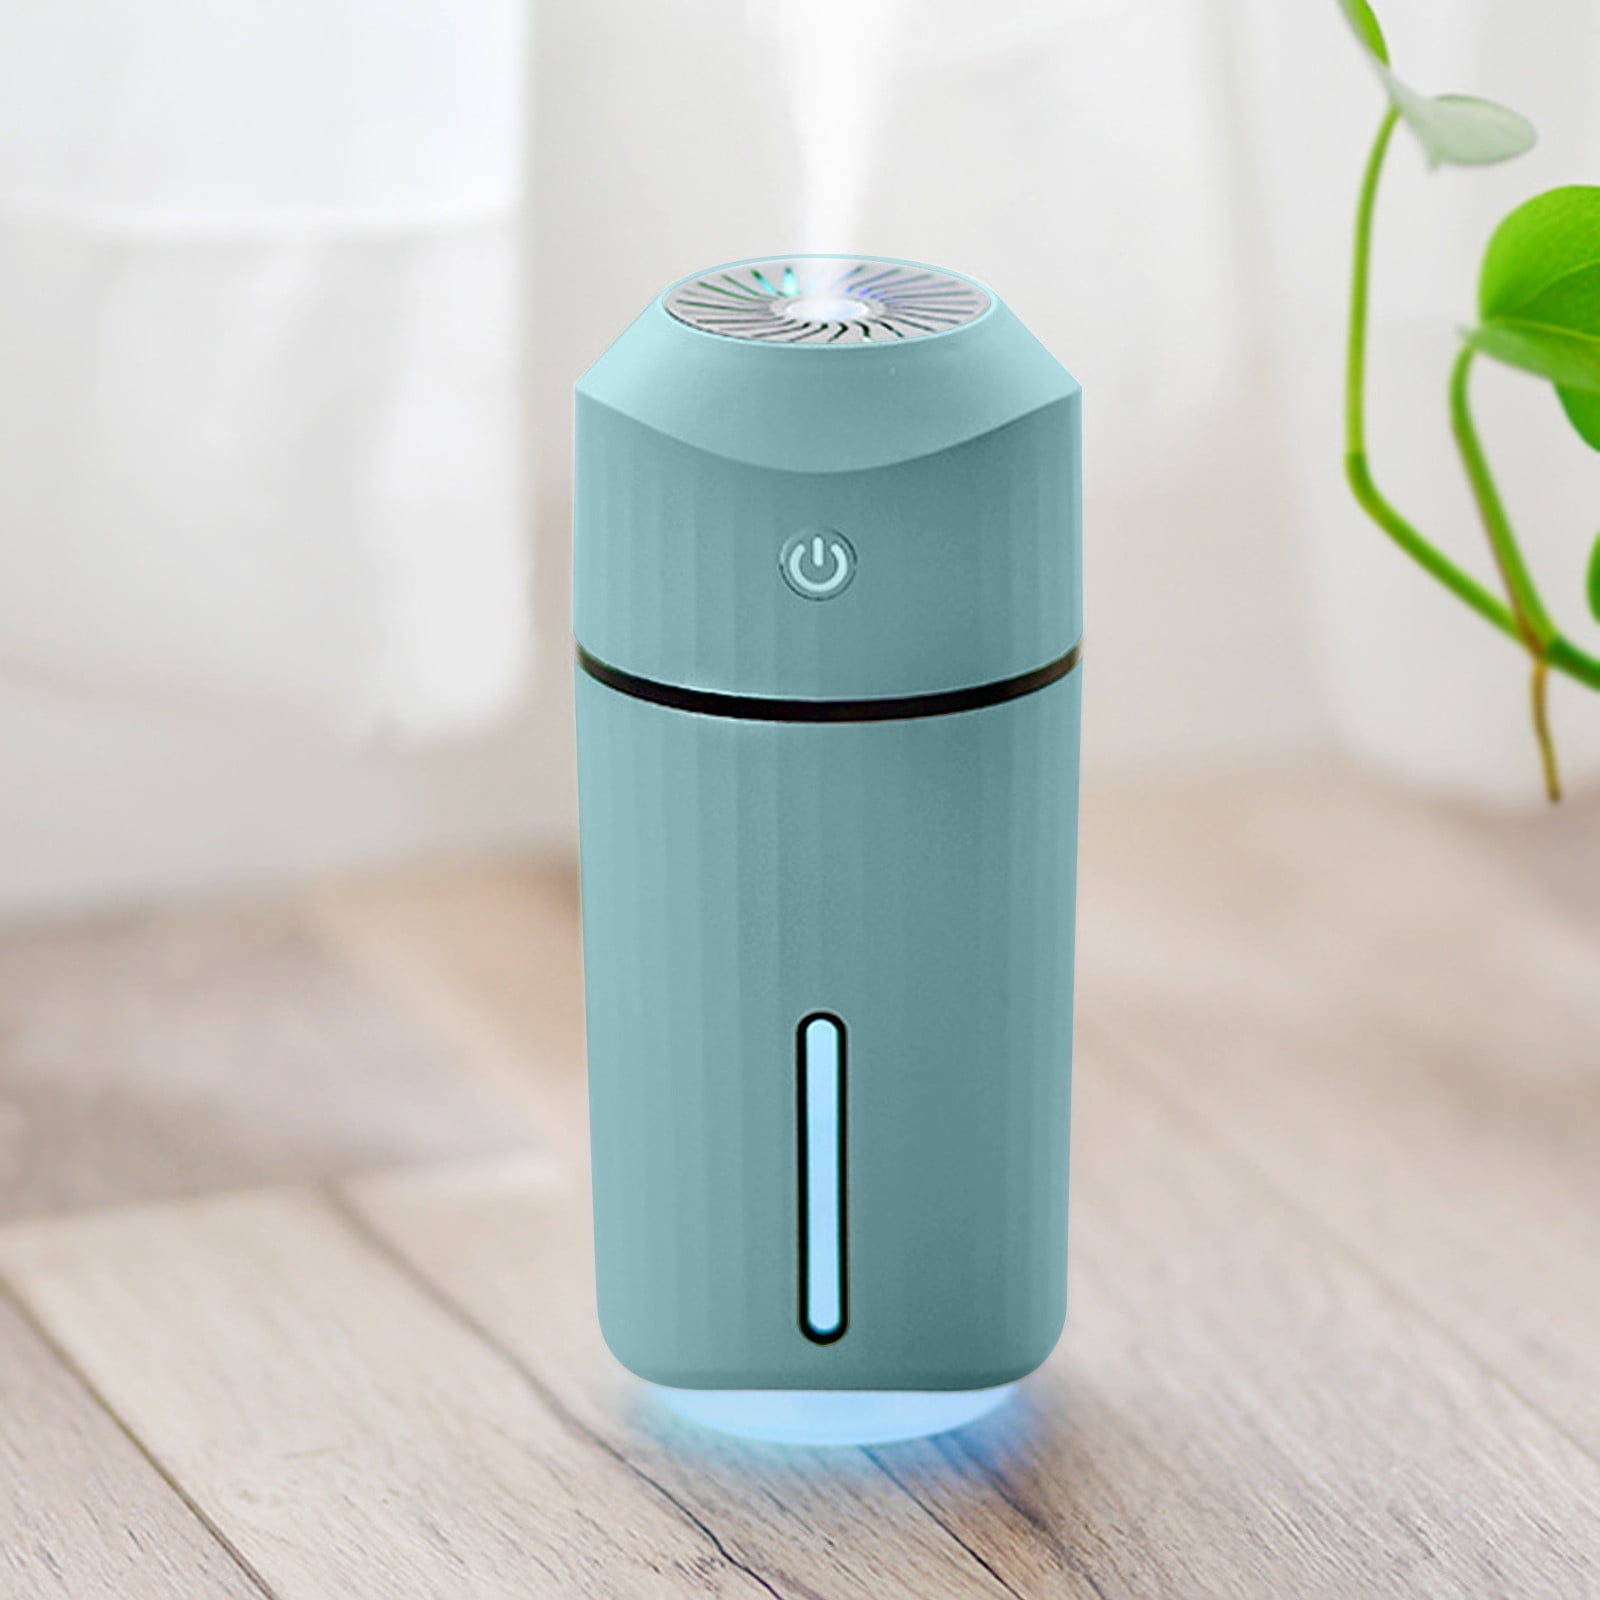 2023 Summer Savings Clearance! WJSXC Mini Humidifier,Portable Humidifiers  with LED Light,Portable Mini USB Humidifier for for Bedroom,Travel,office  and Plants. Visible,Quiet,Cool Mist Pink 